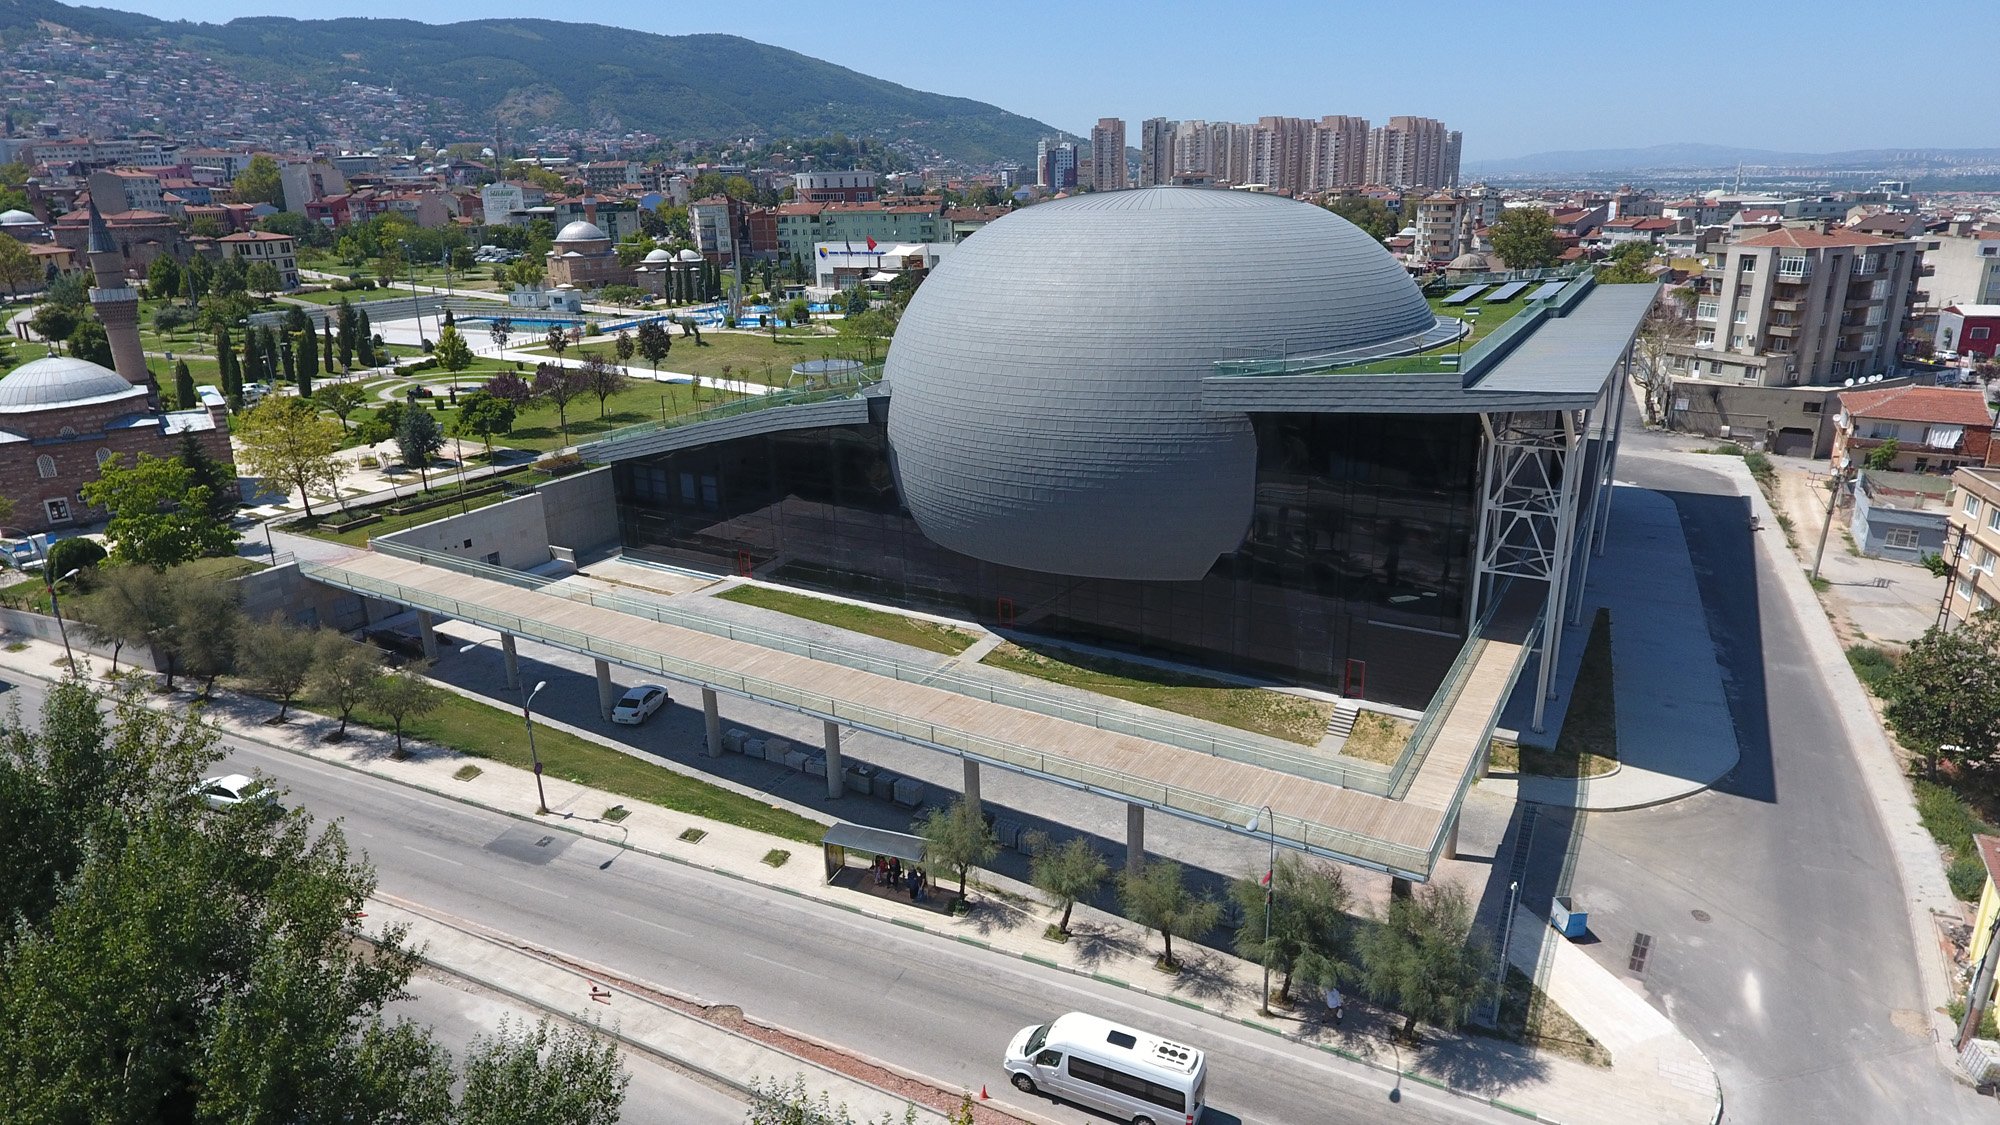 A general view showing the globe-shaped museum from afar. (AA Photo)